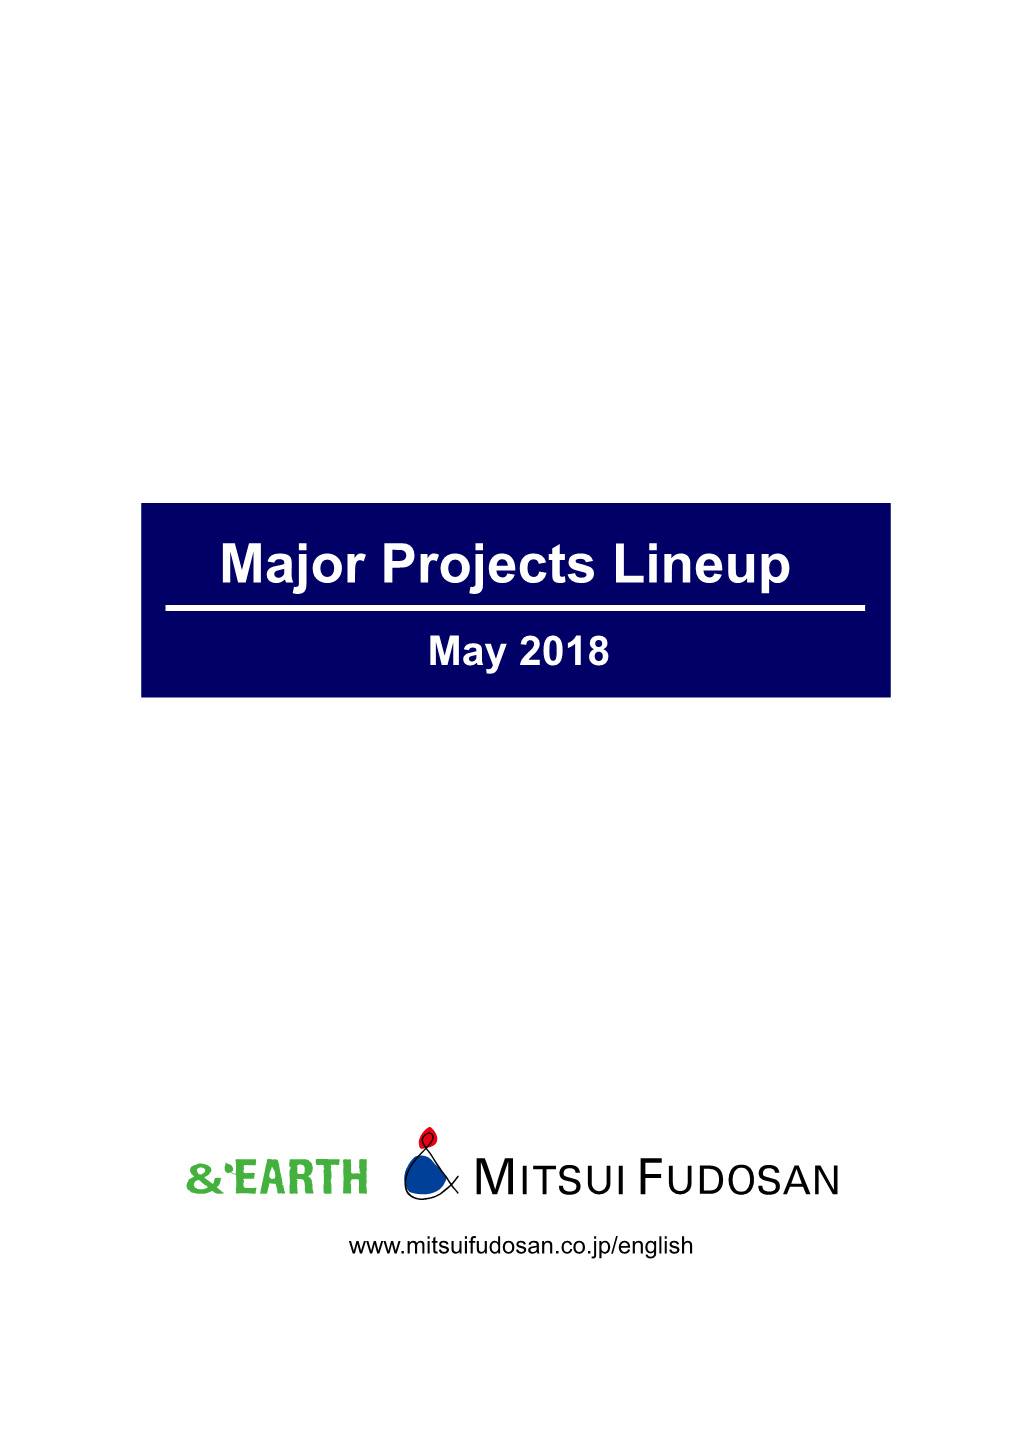 Major Projects Lineup May 2018